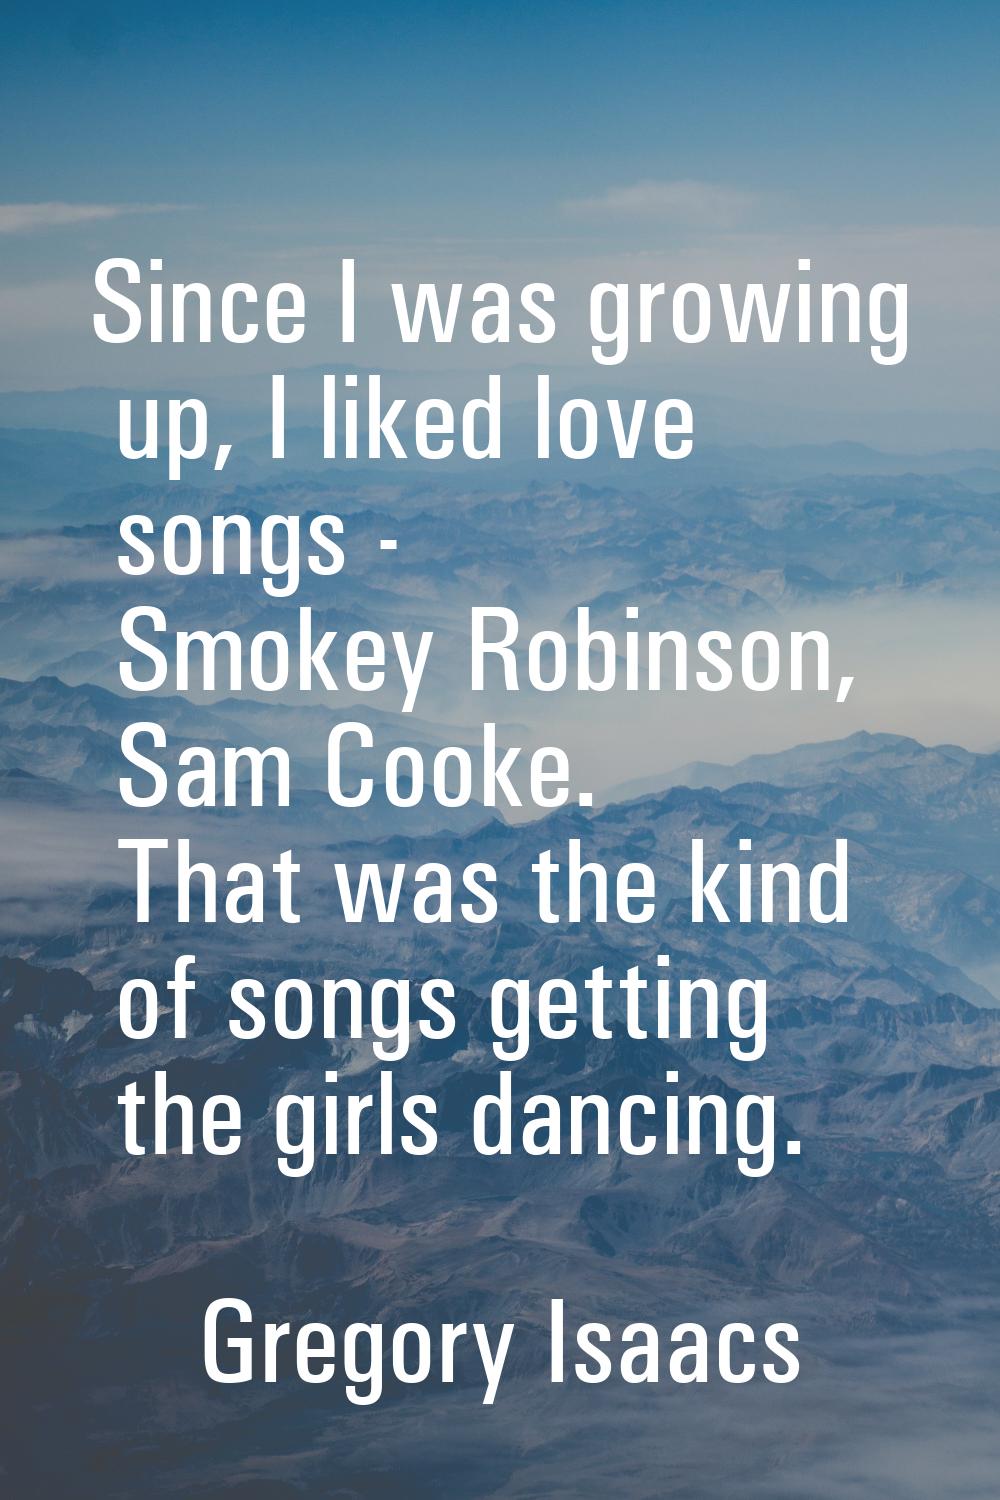 Since I was growing up, I liked love songs - Smokey Robinson, Sam Cooke. That was the kind of songs